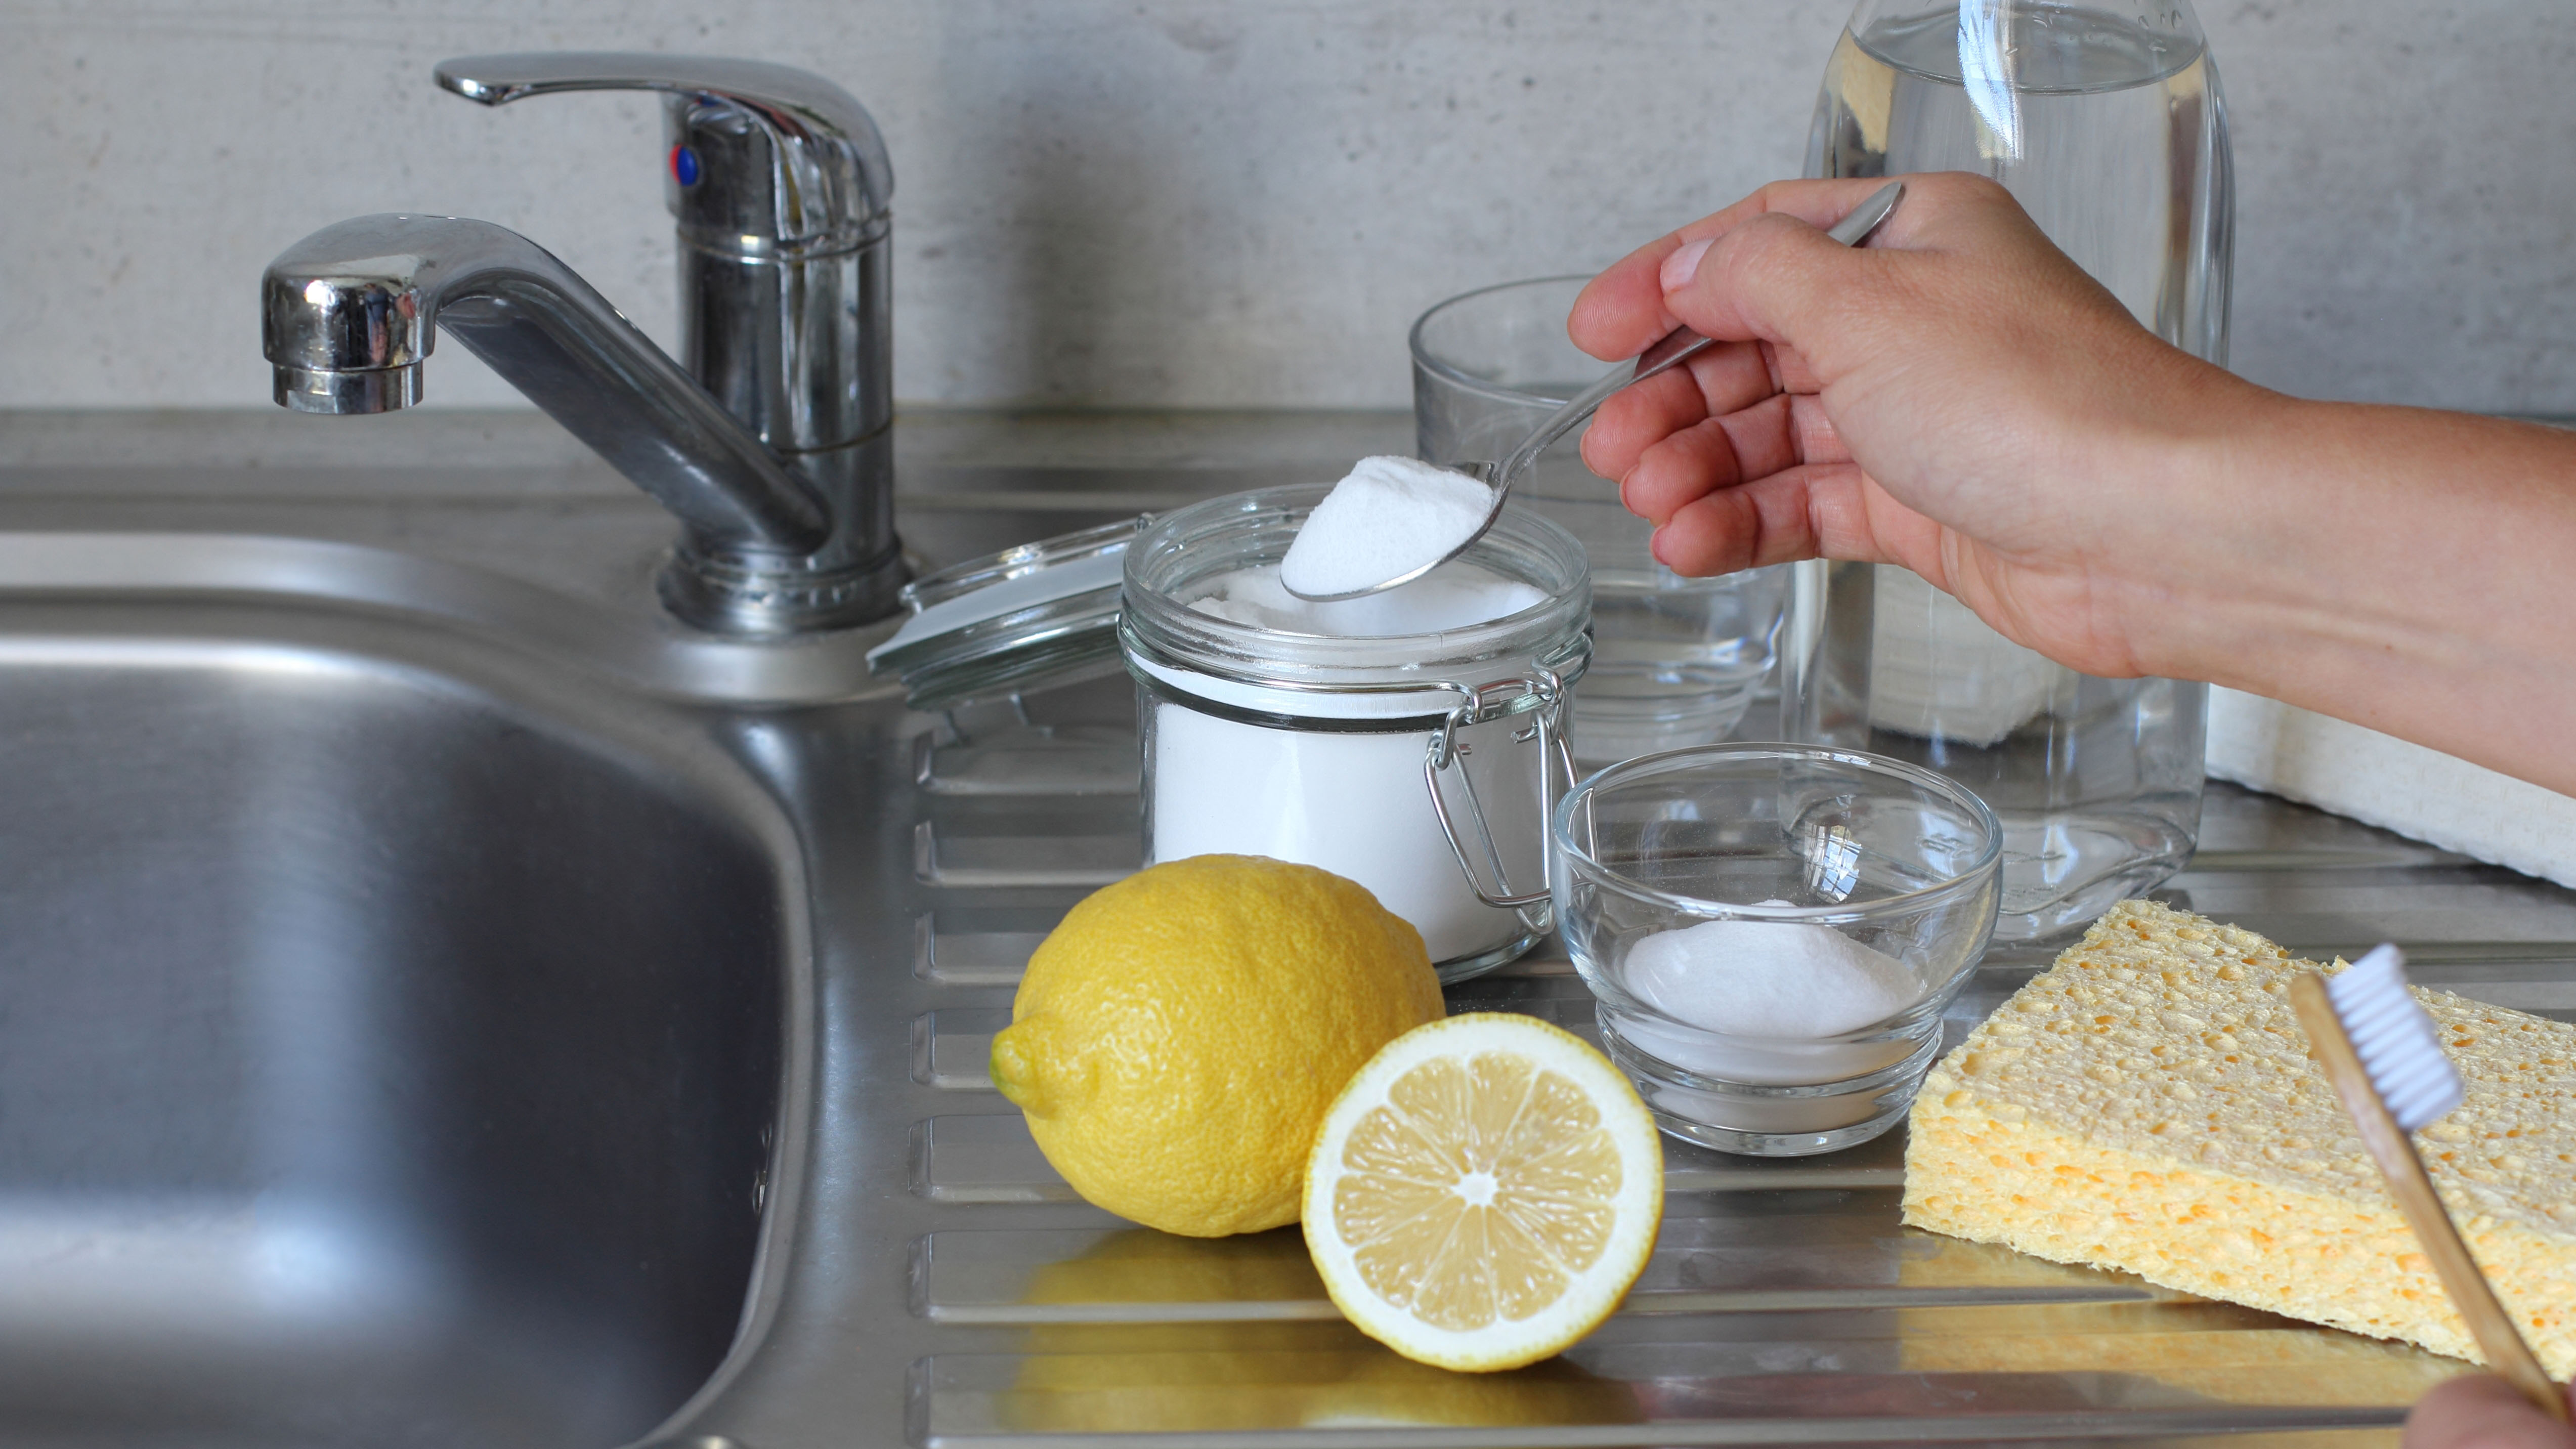 A stainless steel sink with baking soda, lemons and vinegar on the side ready for cleaning